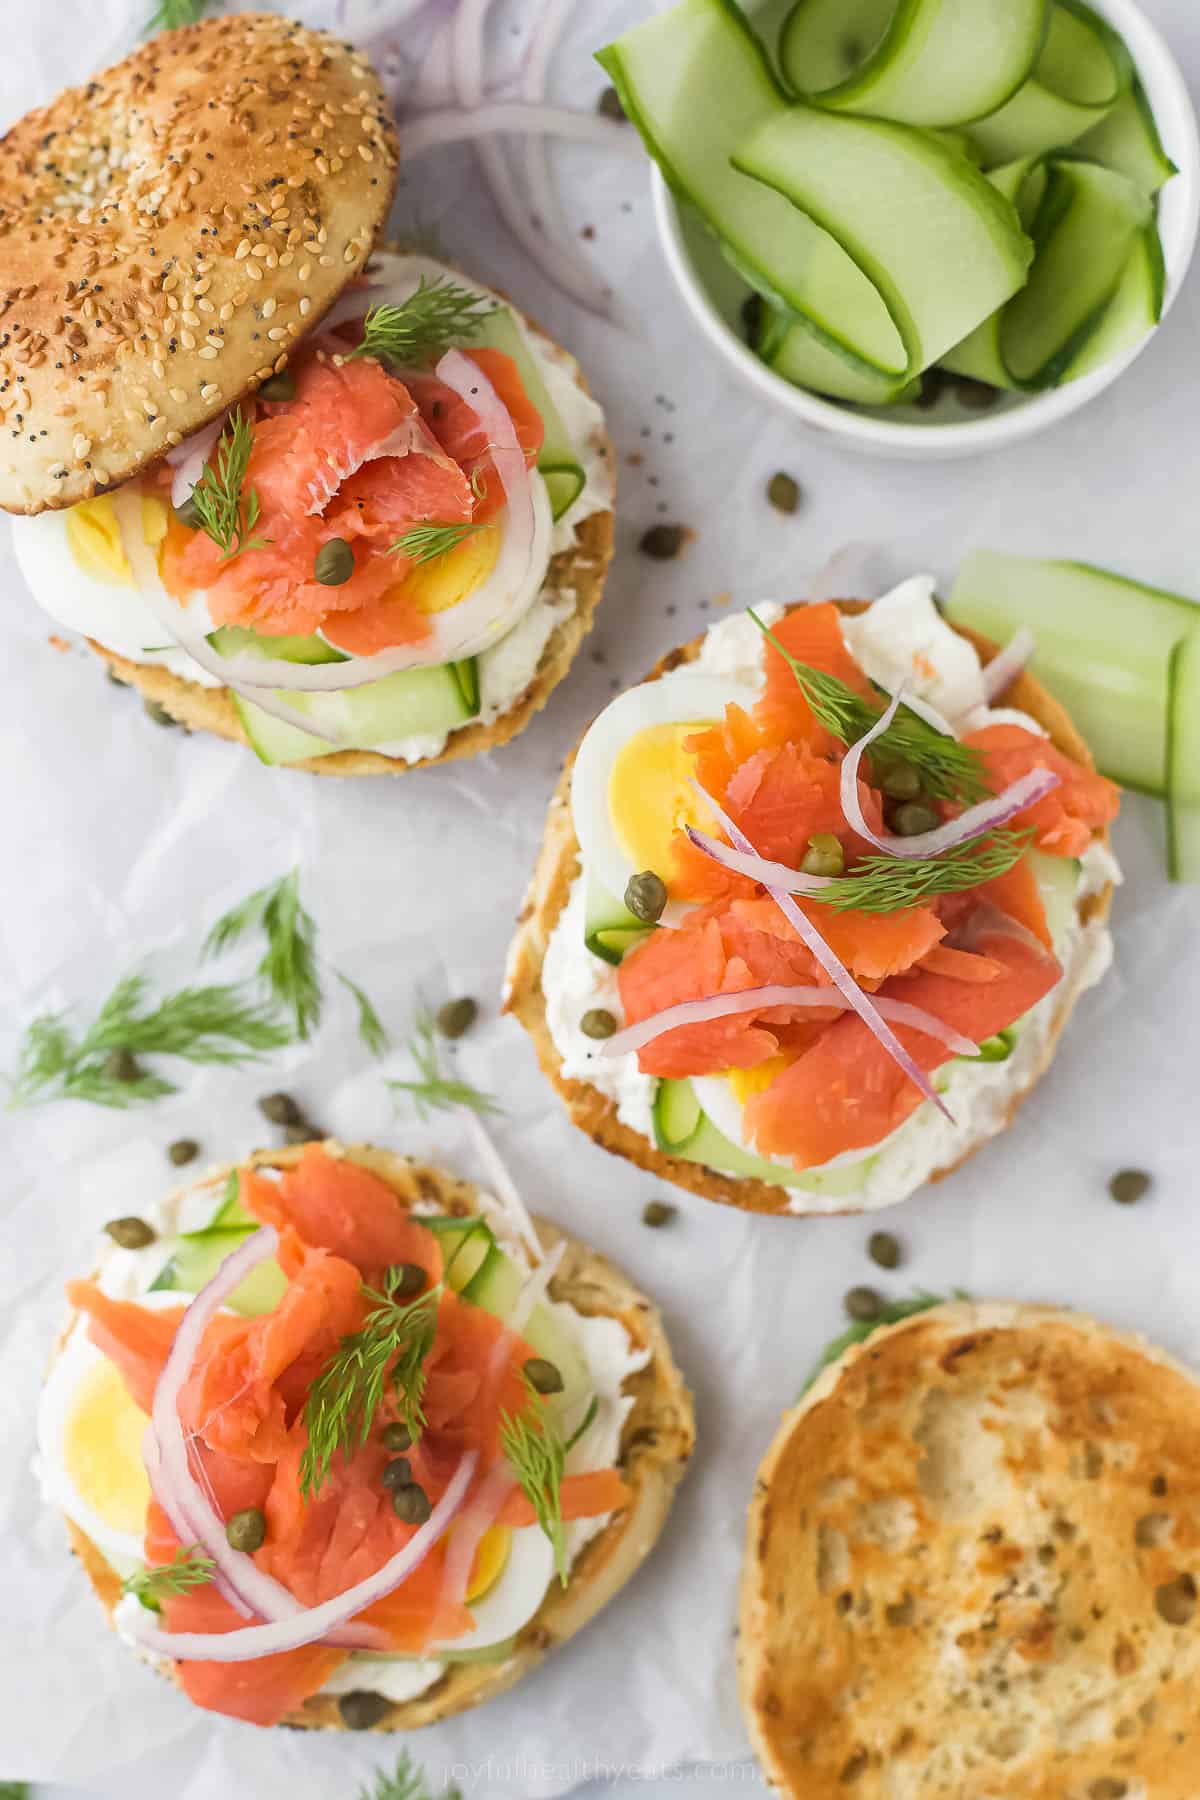 Toasted, open bagels and lox. 